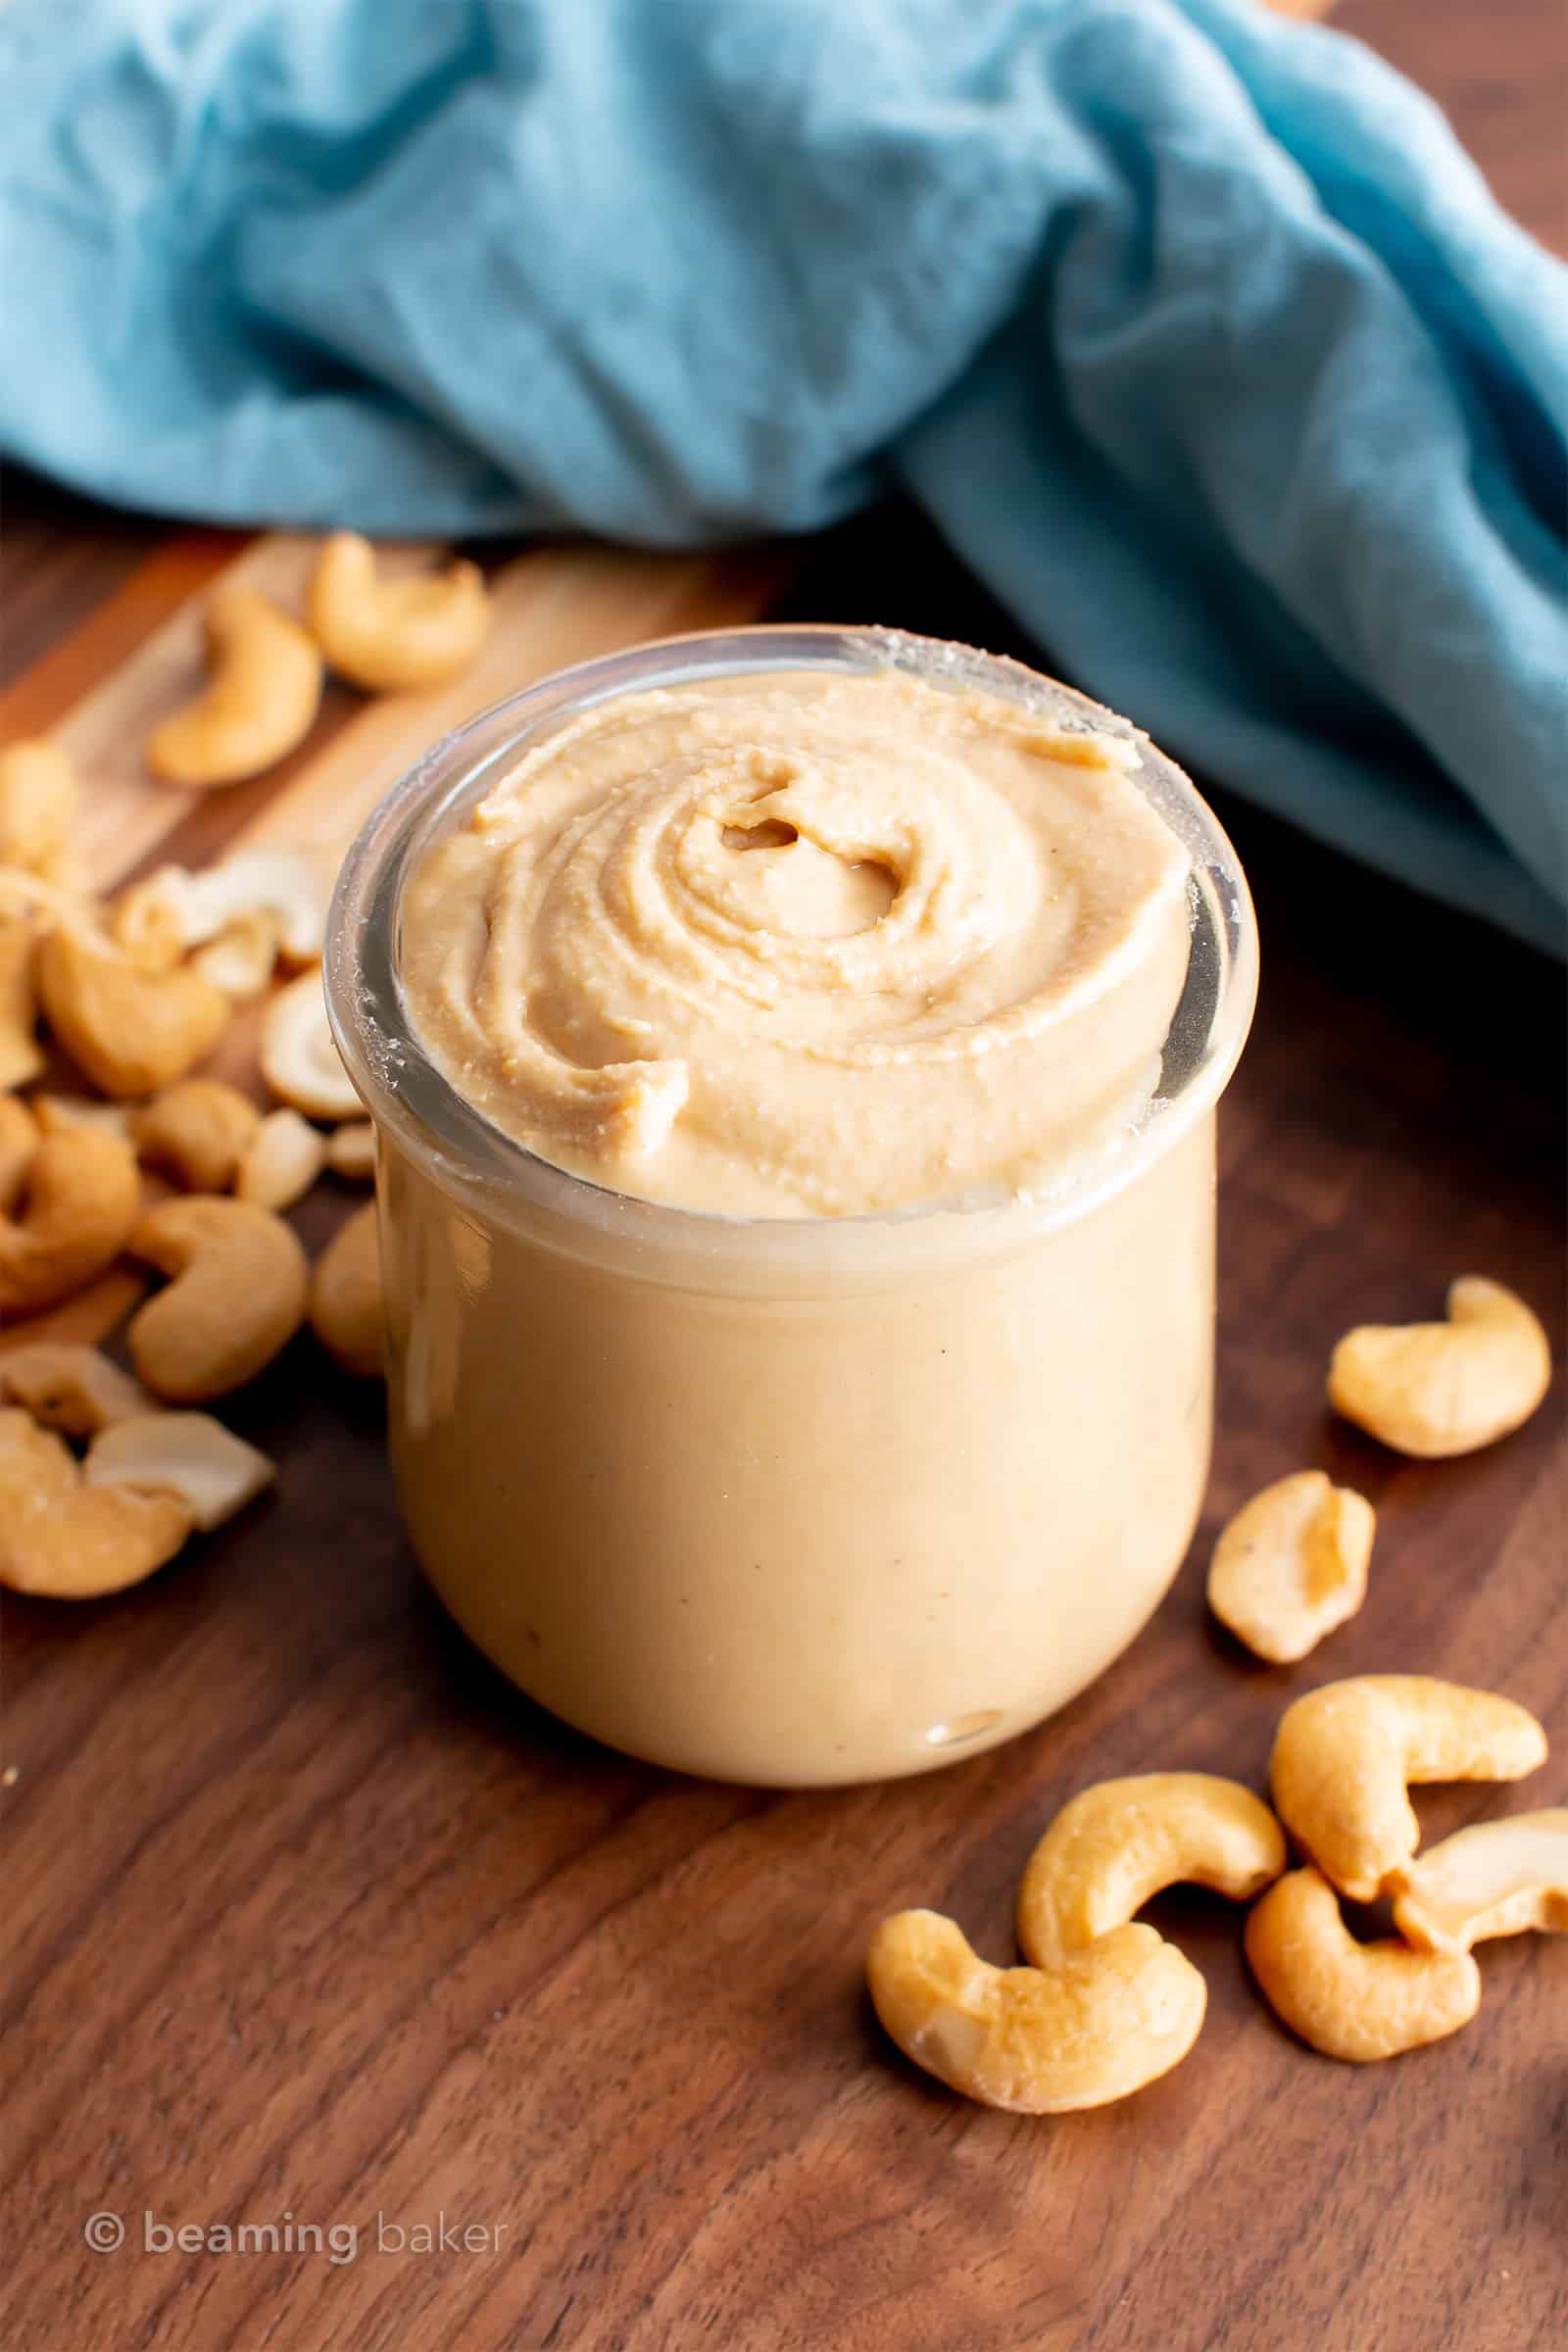 Homemade Cashew Butter: learn how to make cashew butter with just 1 ingredient and a few minutes! Step-by-step tutorial with clear, detailed pics to follow along. #CashewButter #CashewNutButter #Homemade #Cashews | Recipe at BeamingBaker.com